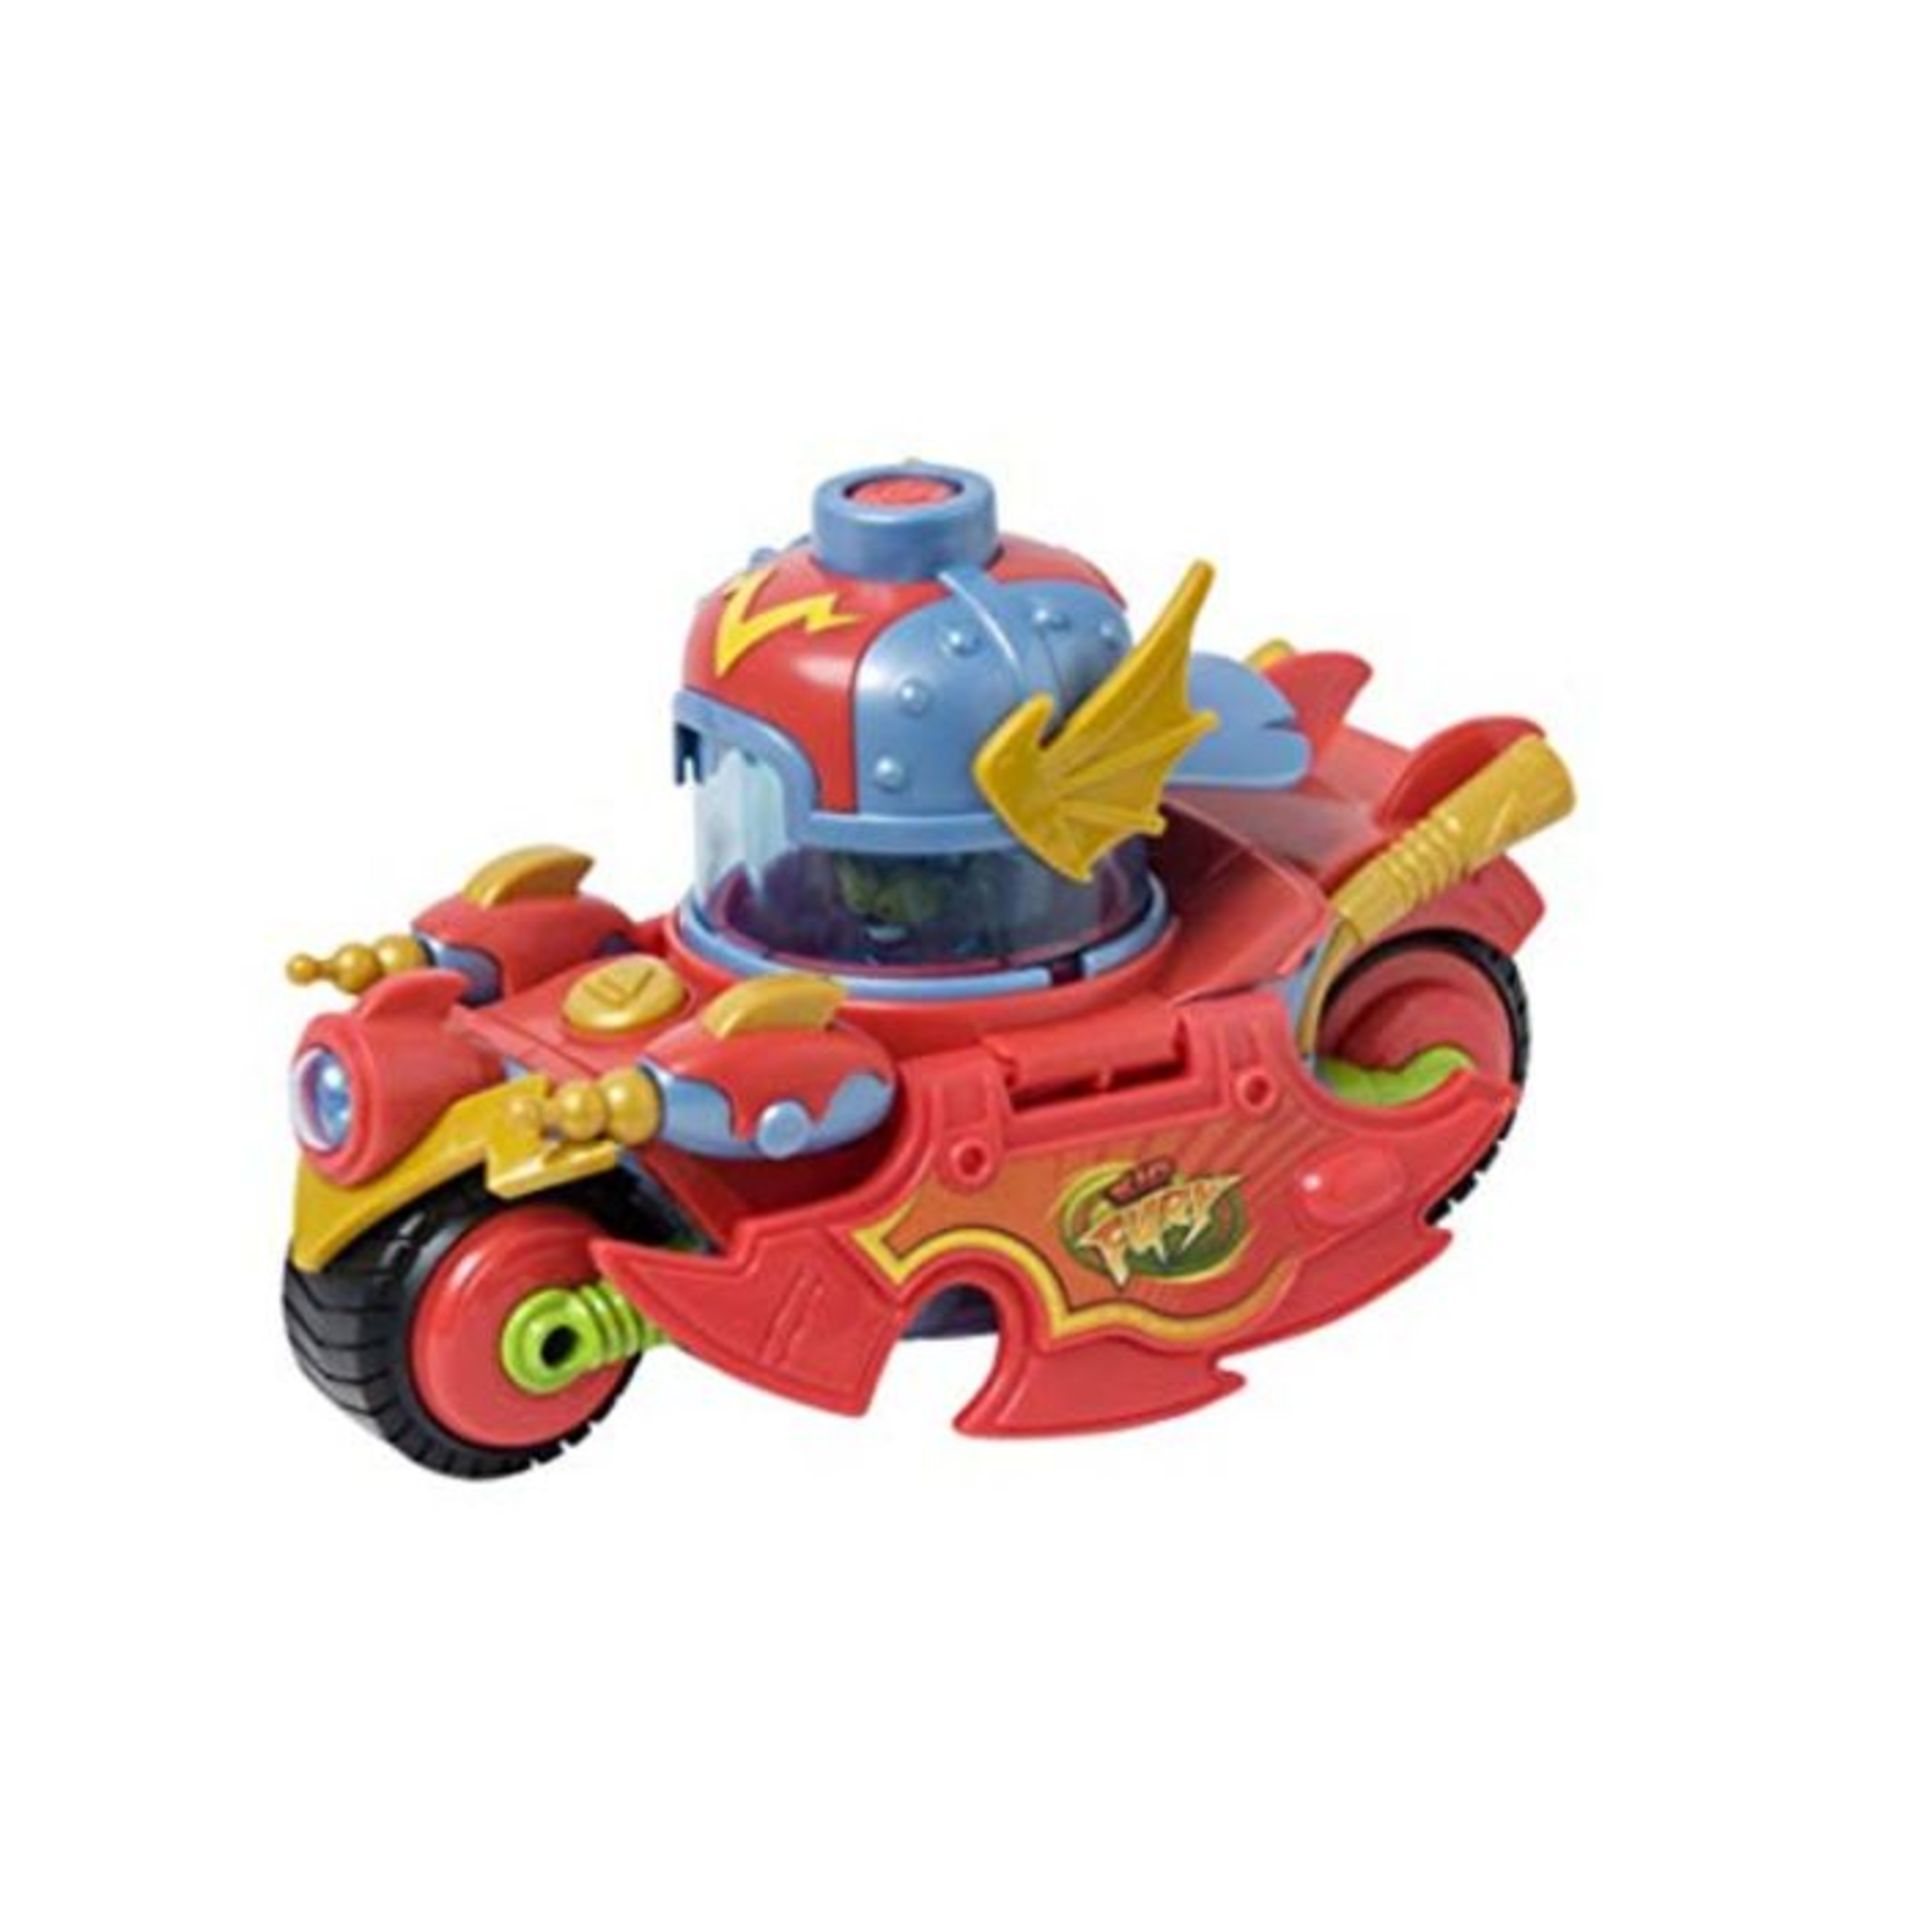 SuperThings Rivals of Kaboom - Secret Spies - Kid Fury Vehicle (PSTSP112IN60) with Can - Image 3 of 4